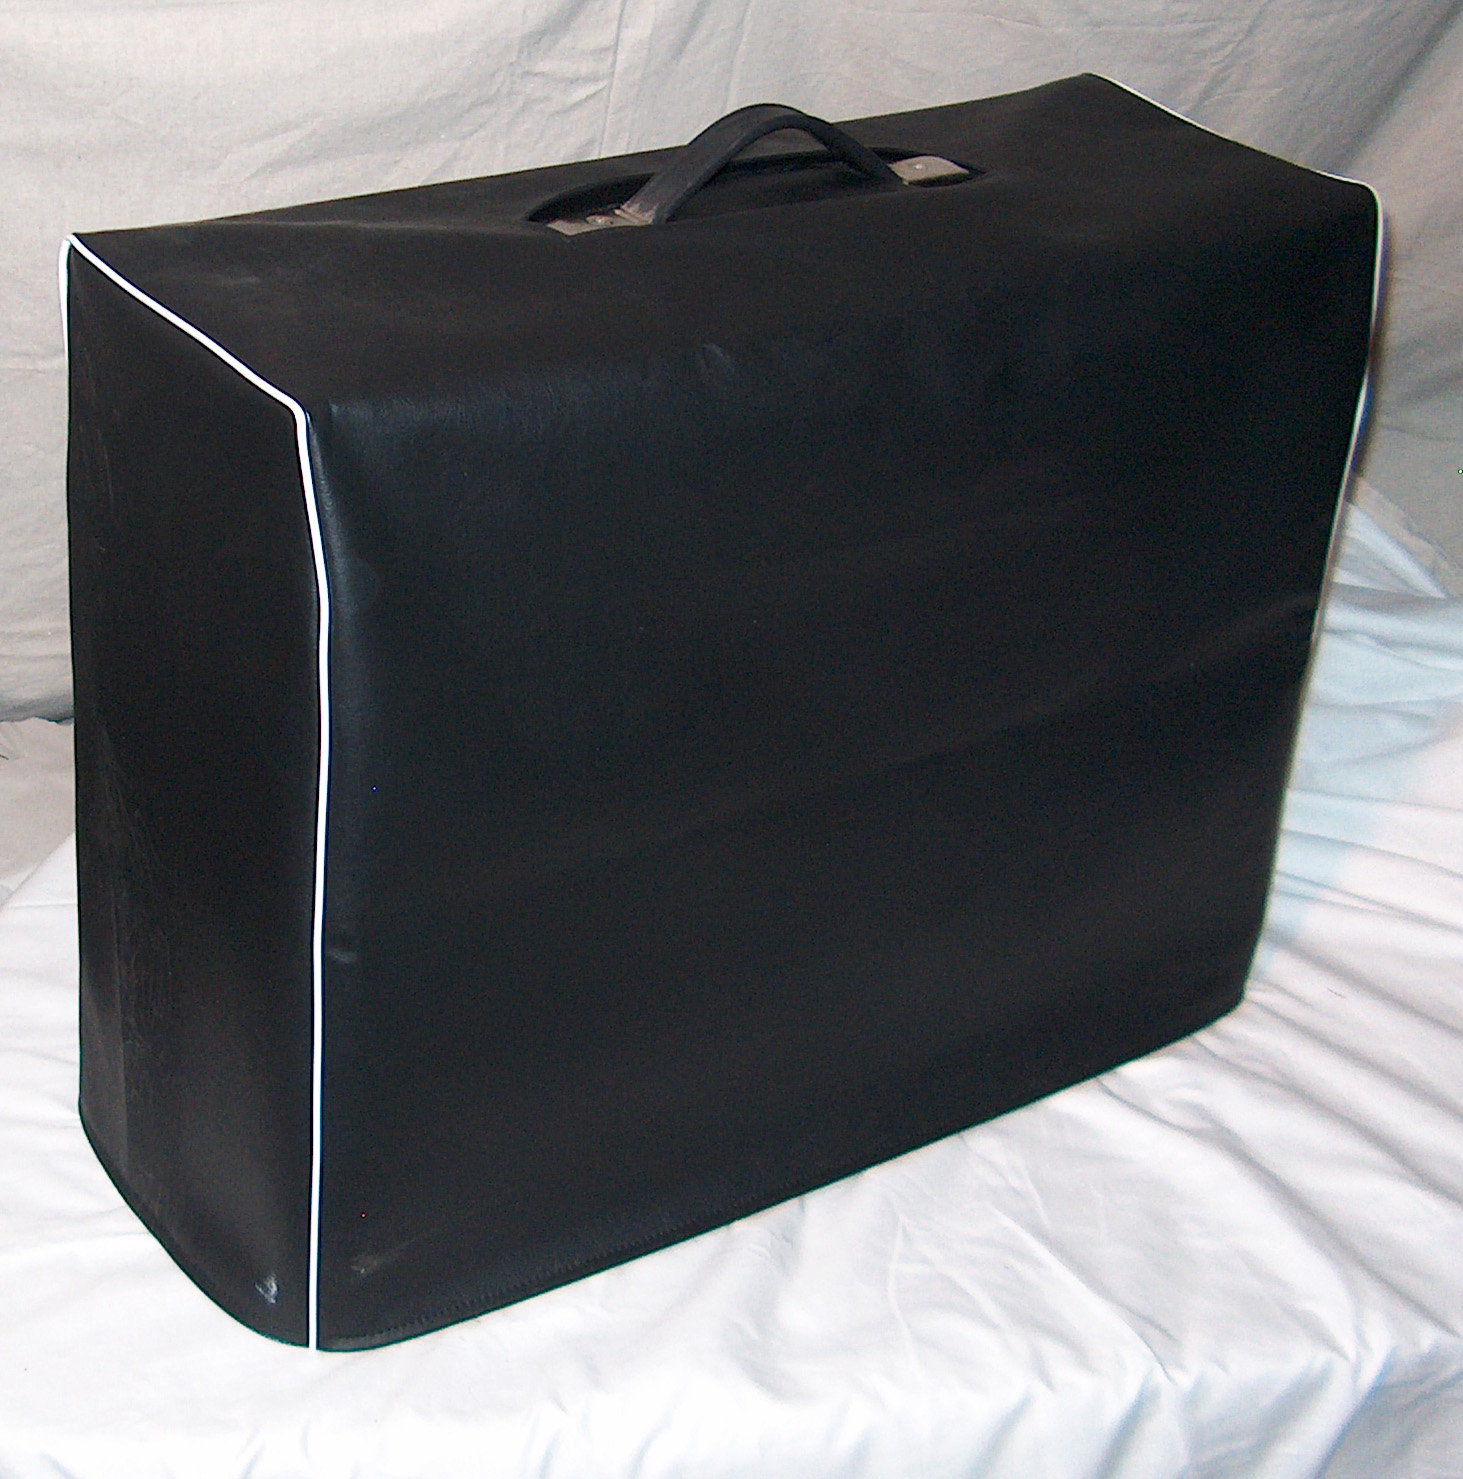 Example of black vinyl cover with white piping